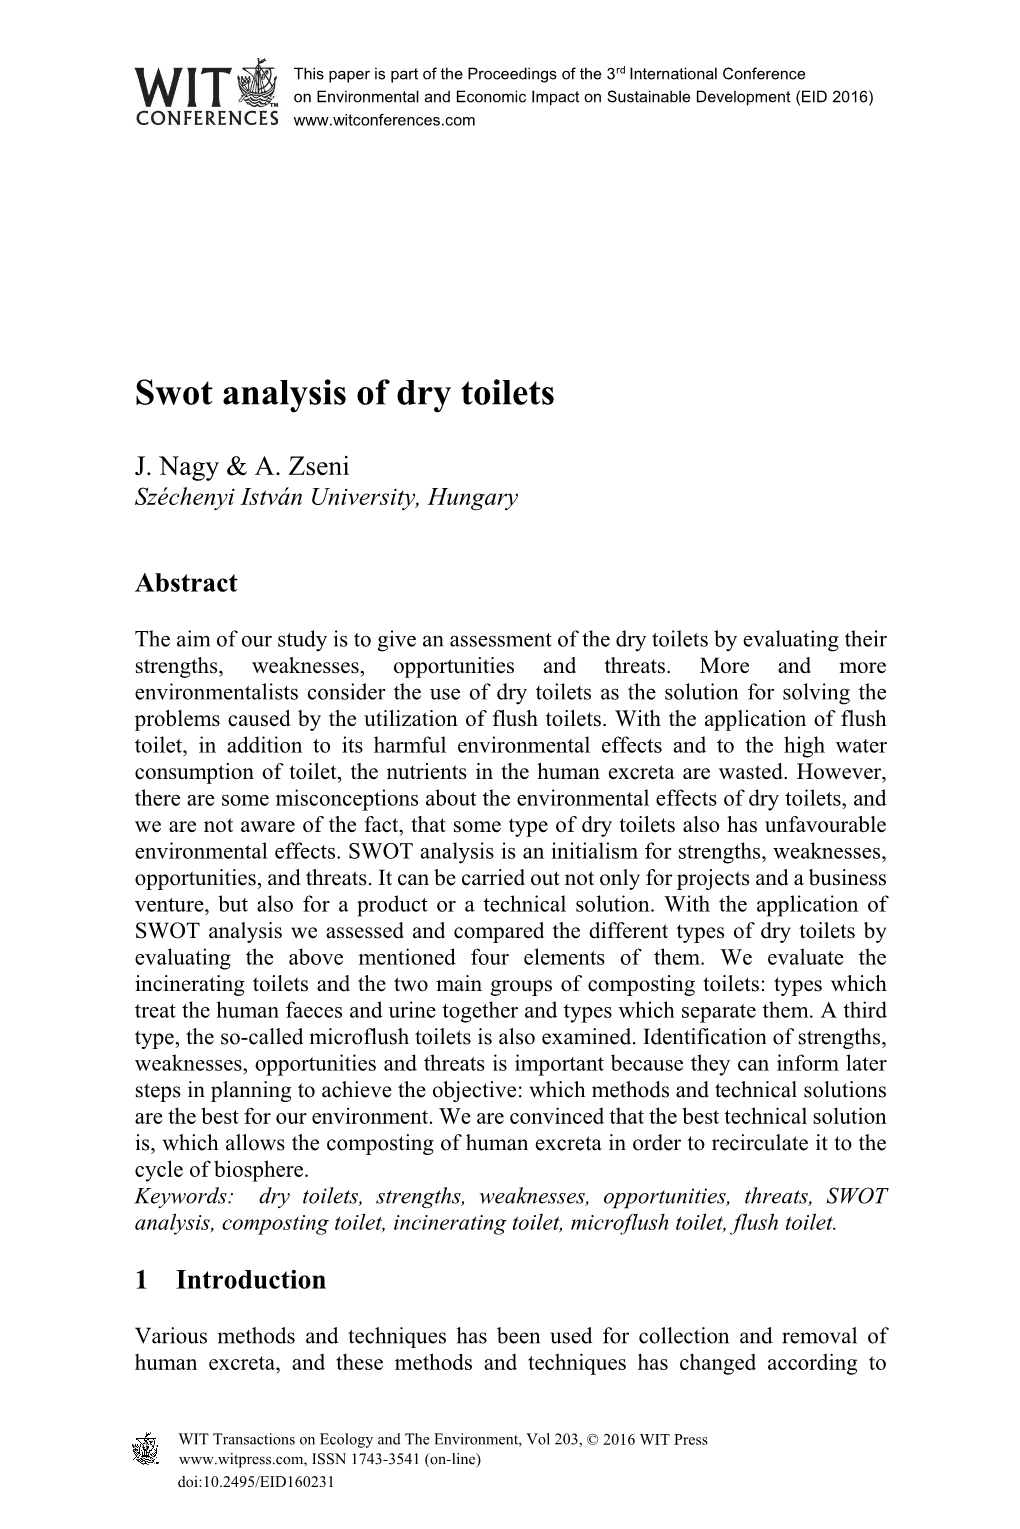 Swot Analysis of Dry Toilets